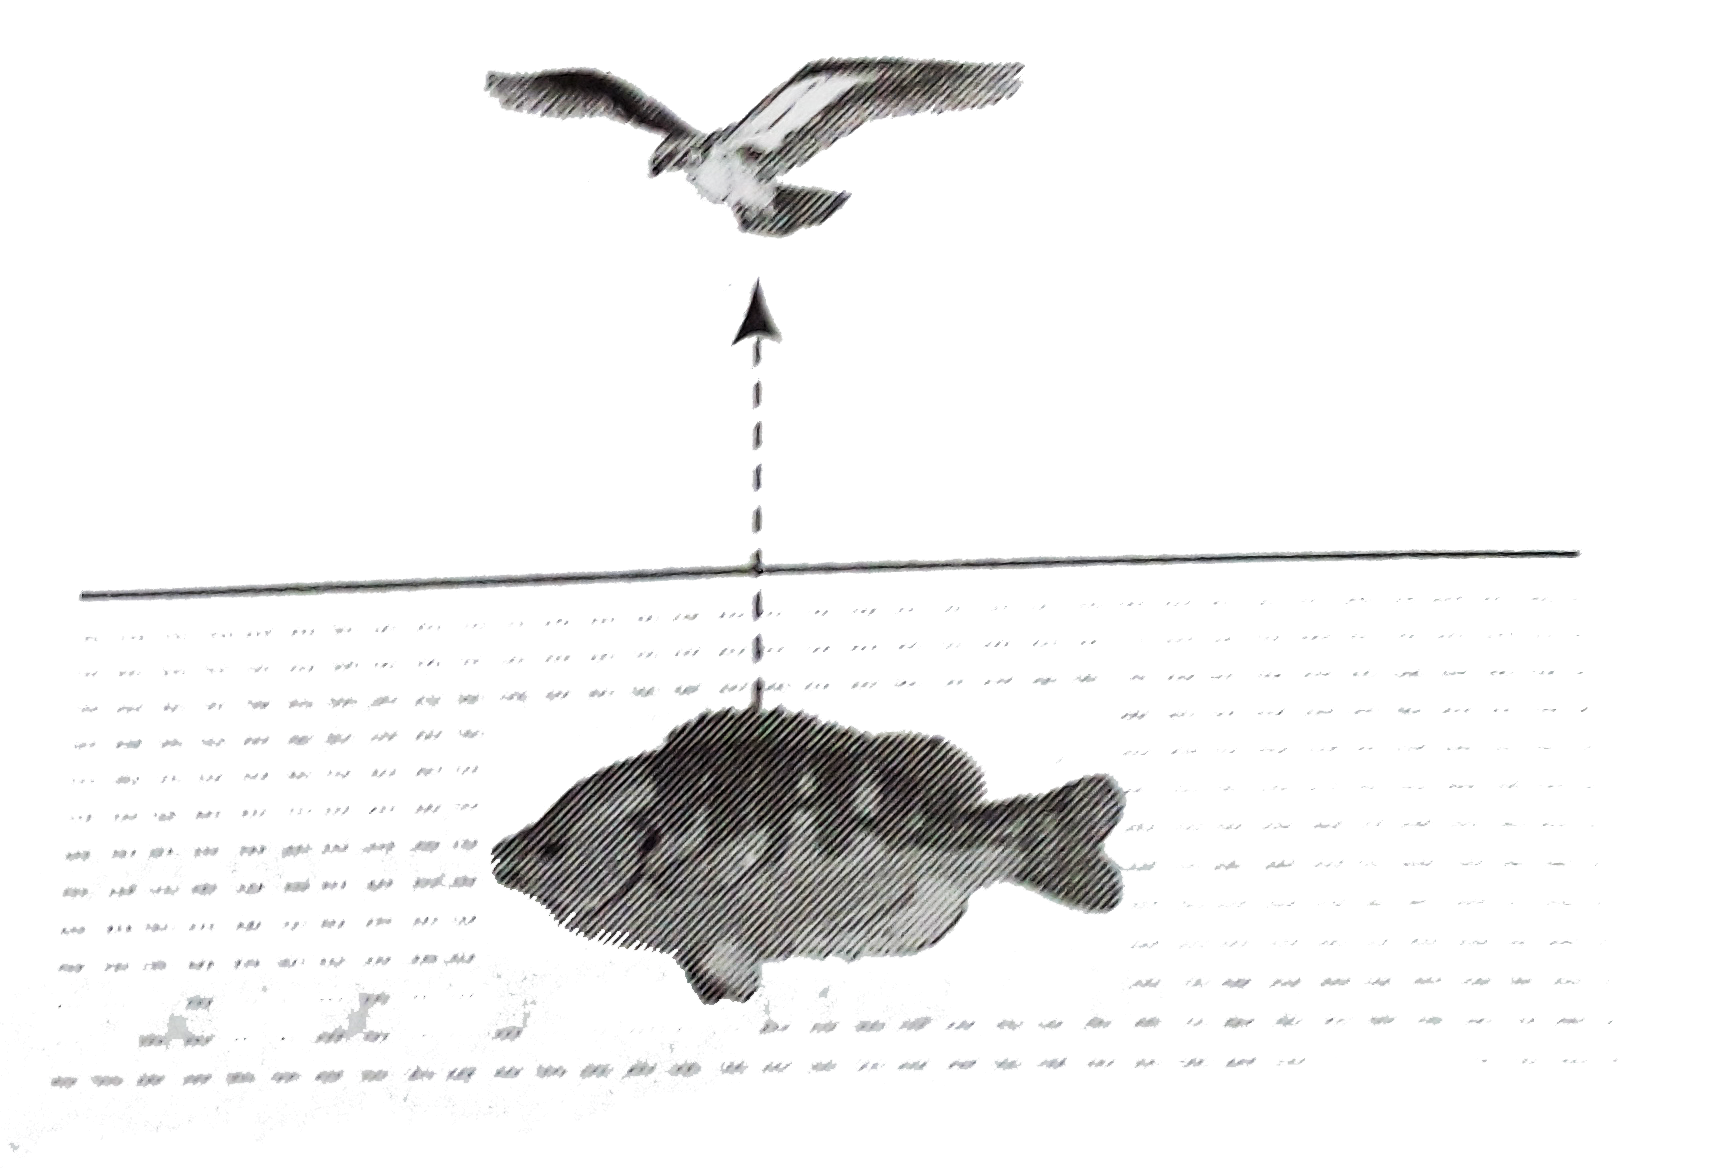 A fish rising up vertically toward the  surface of water with speed 3ms^(-1) observes a bird diving down vertically towards it with speed 9ms^(-1) . The actual velocity of bird is